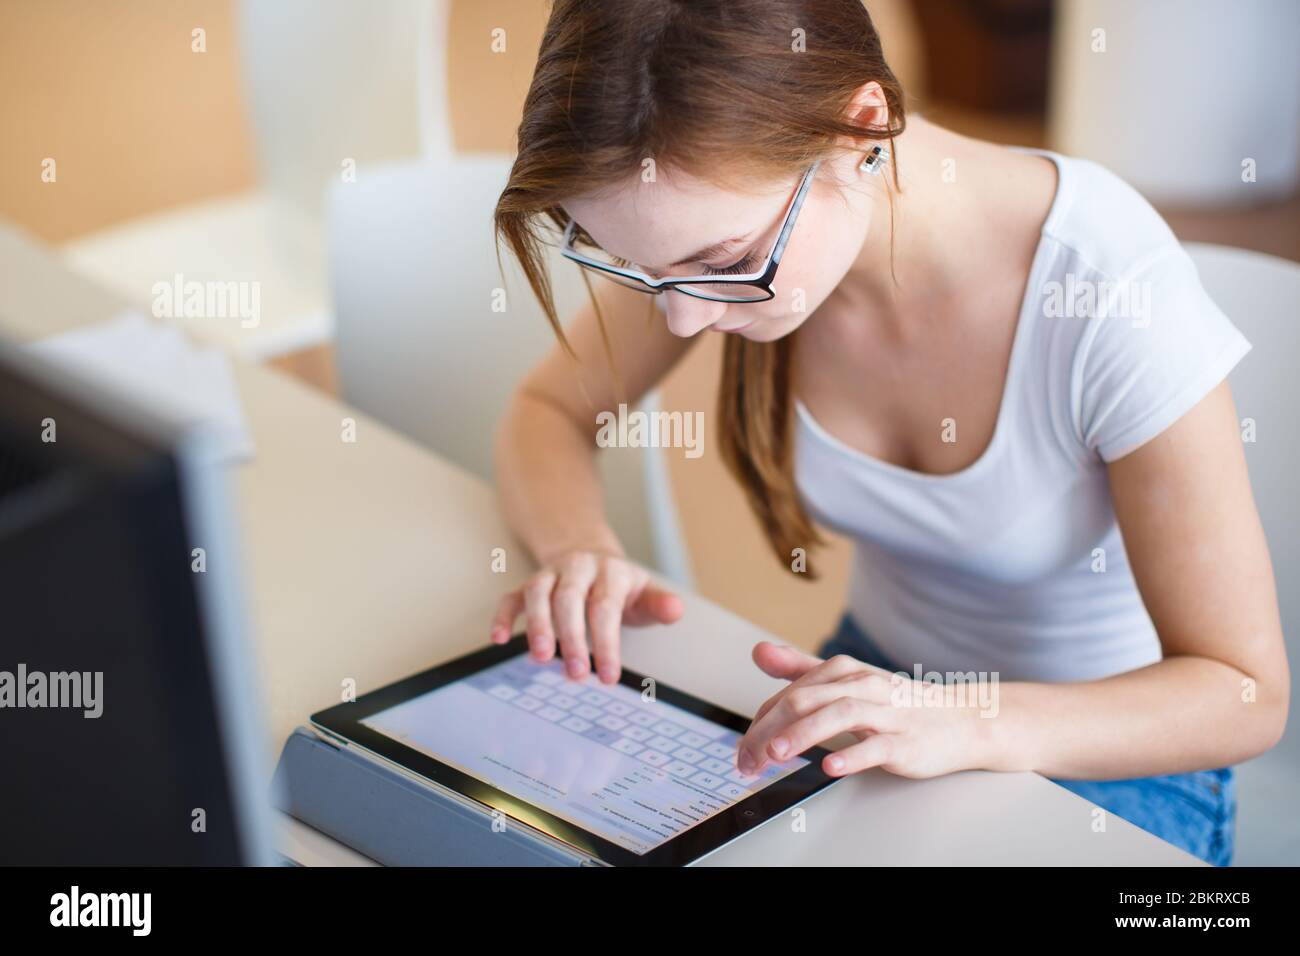 Smiling female student/ businesswoman using her tablet computer and a desktop computer, staying up to date, working, looking at the camera. Stock Photo